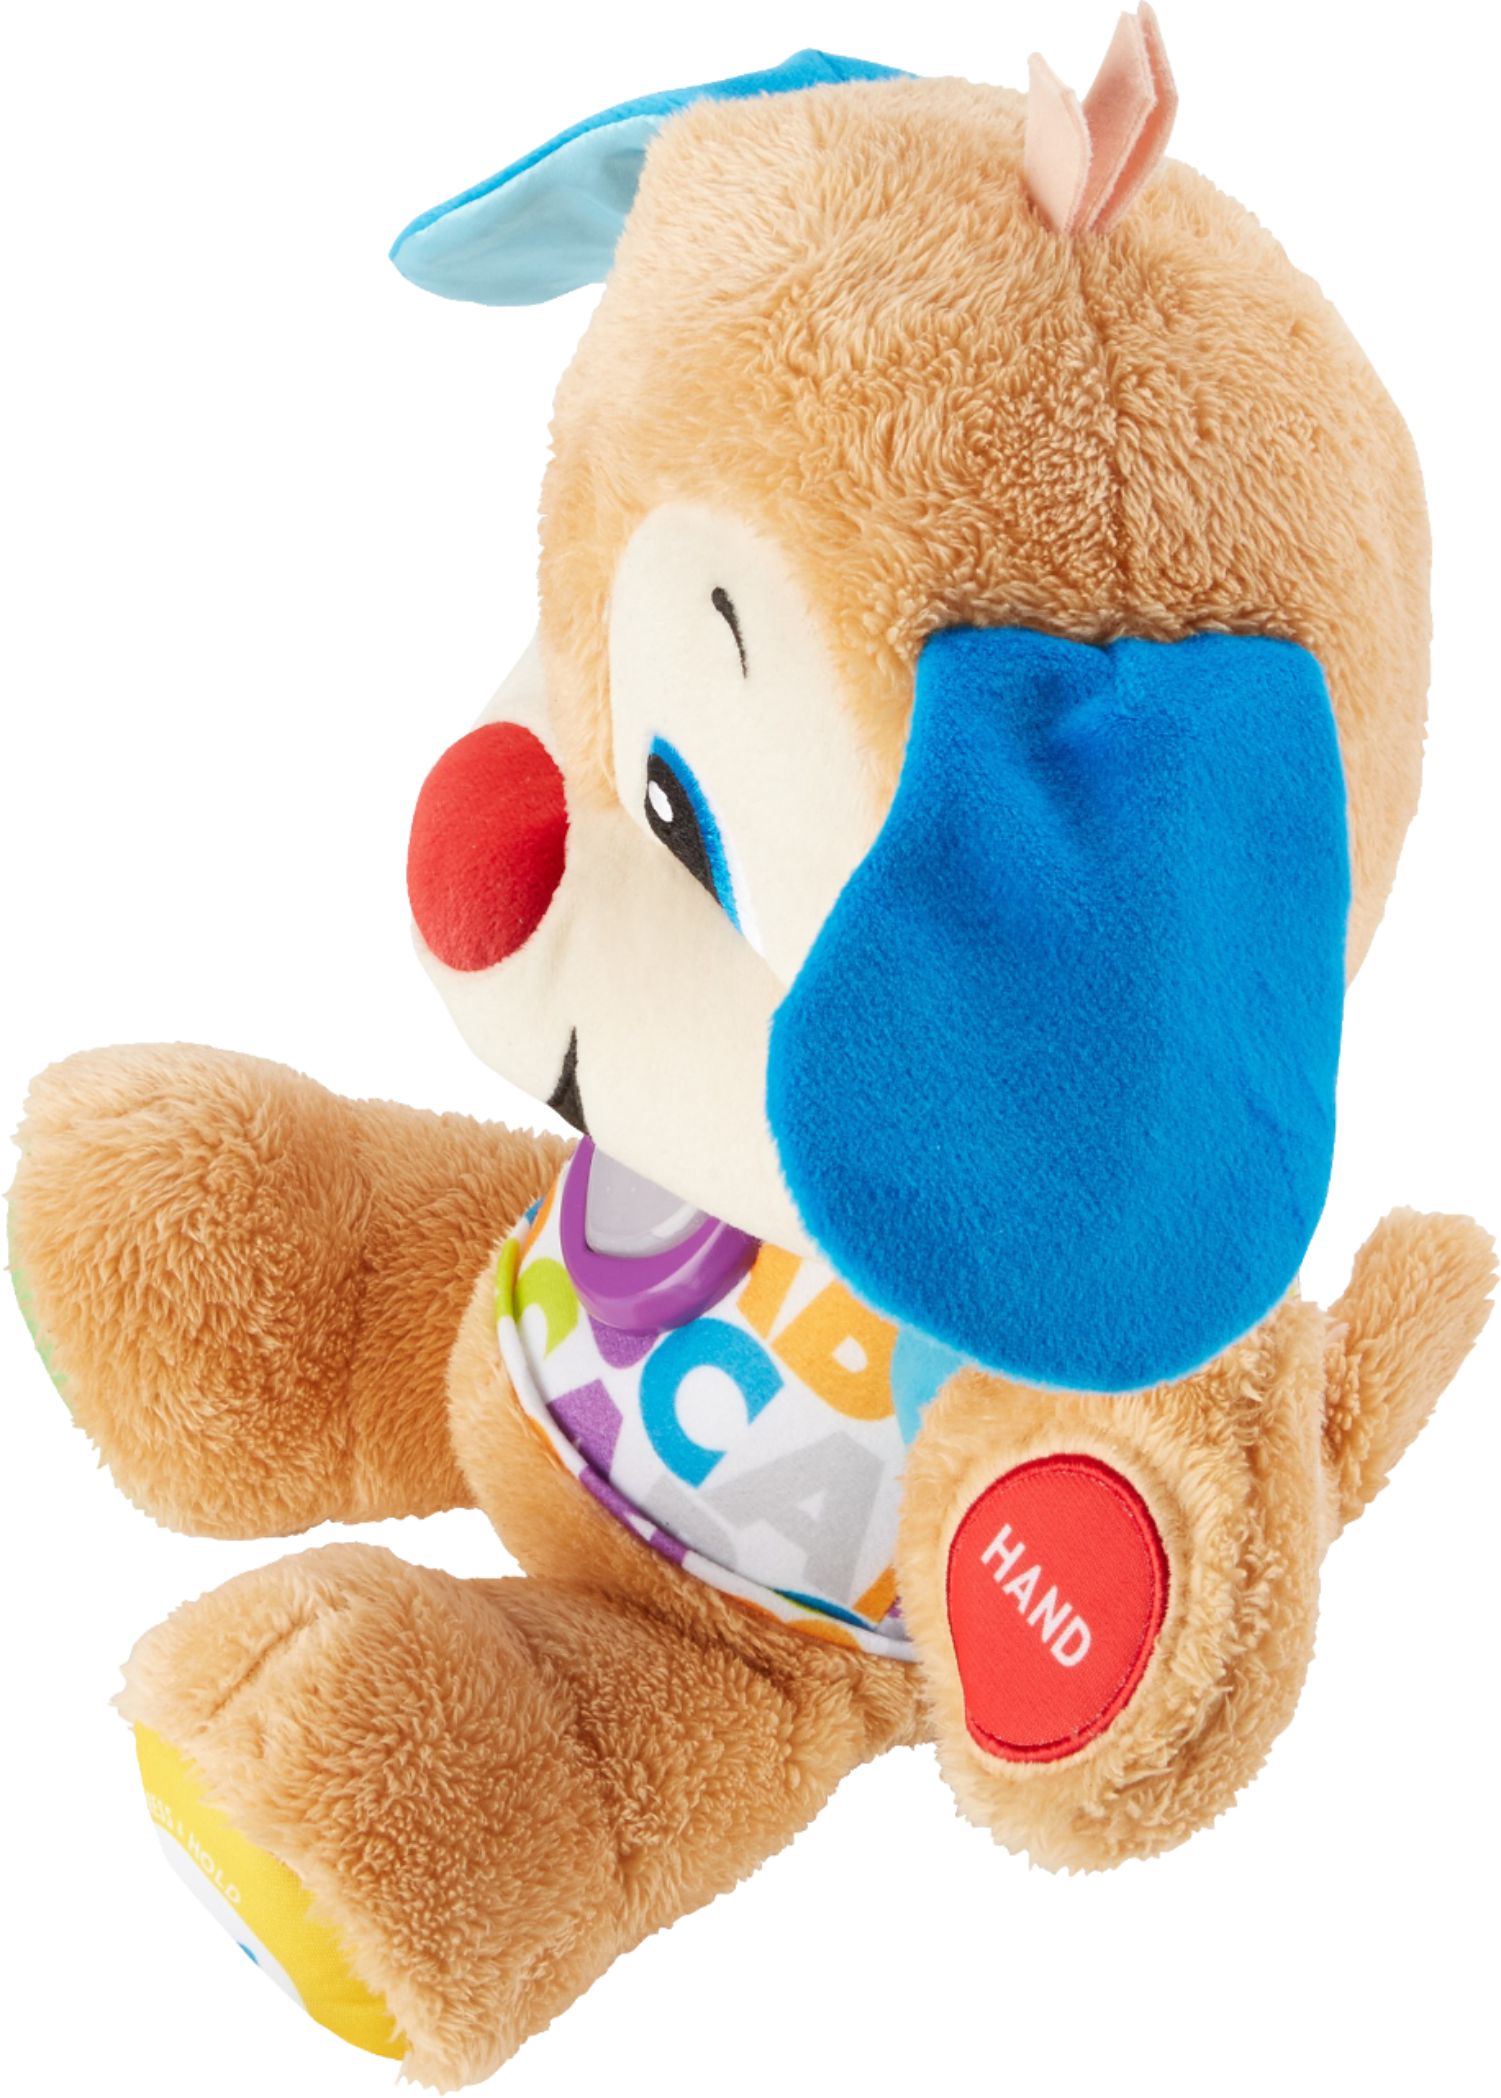 Tummy Teddy Bear Puppy Laugh and Learn Fisher Price Educational Sing Soft VGC 